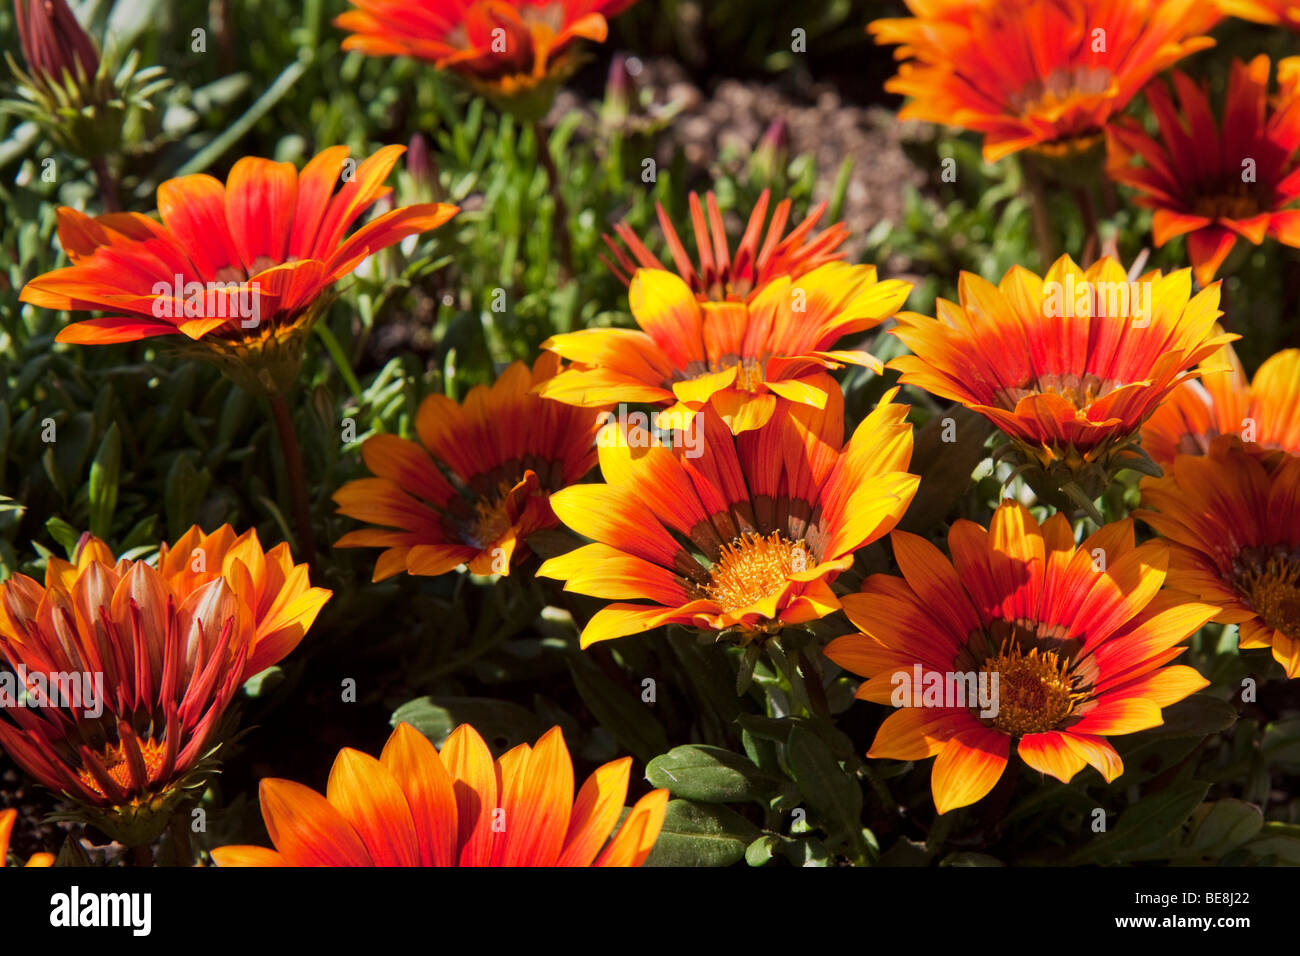 Red and yellow African Daisies. Family: Asteraceae, Genus: Venidium, 20 to 30 species. South Africa. Stock Photo